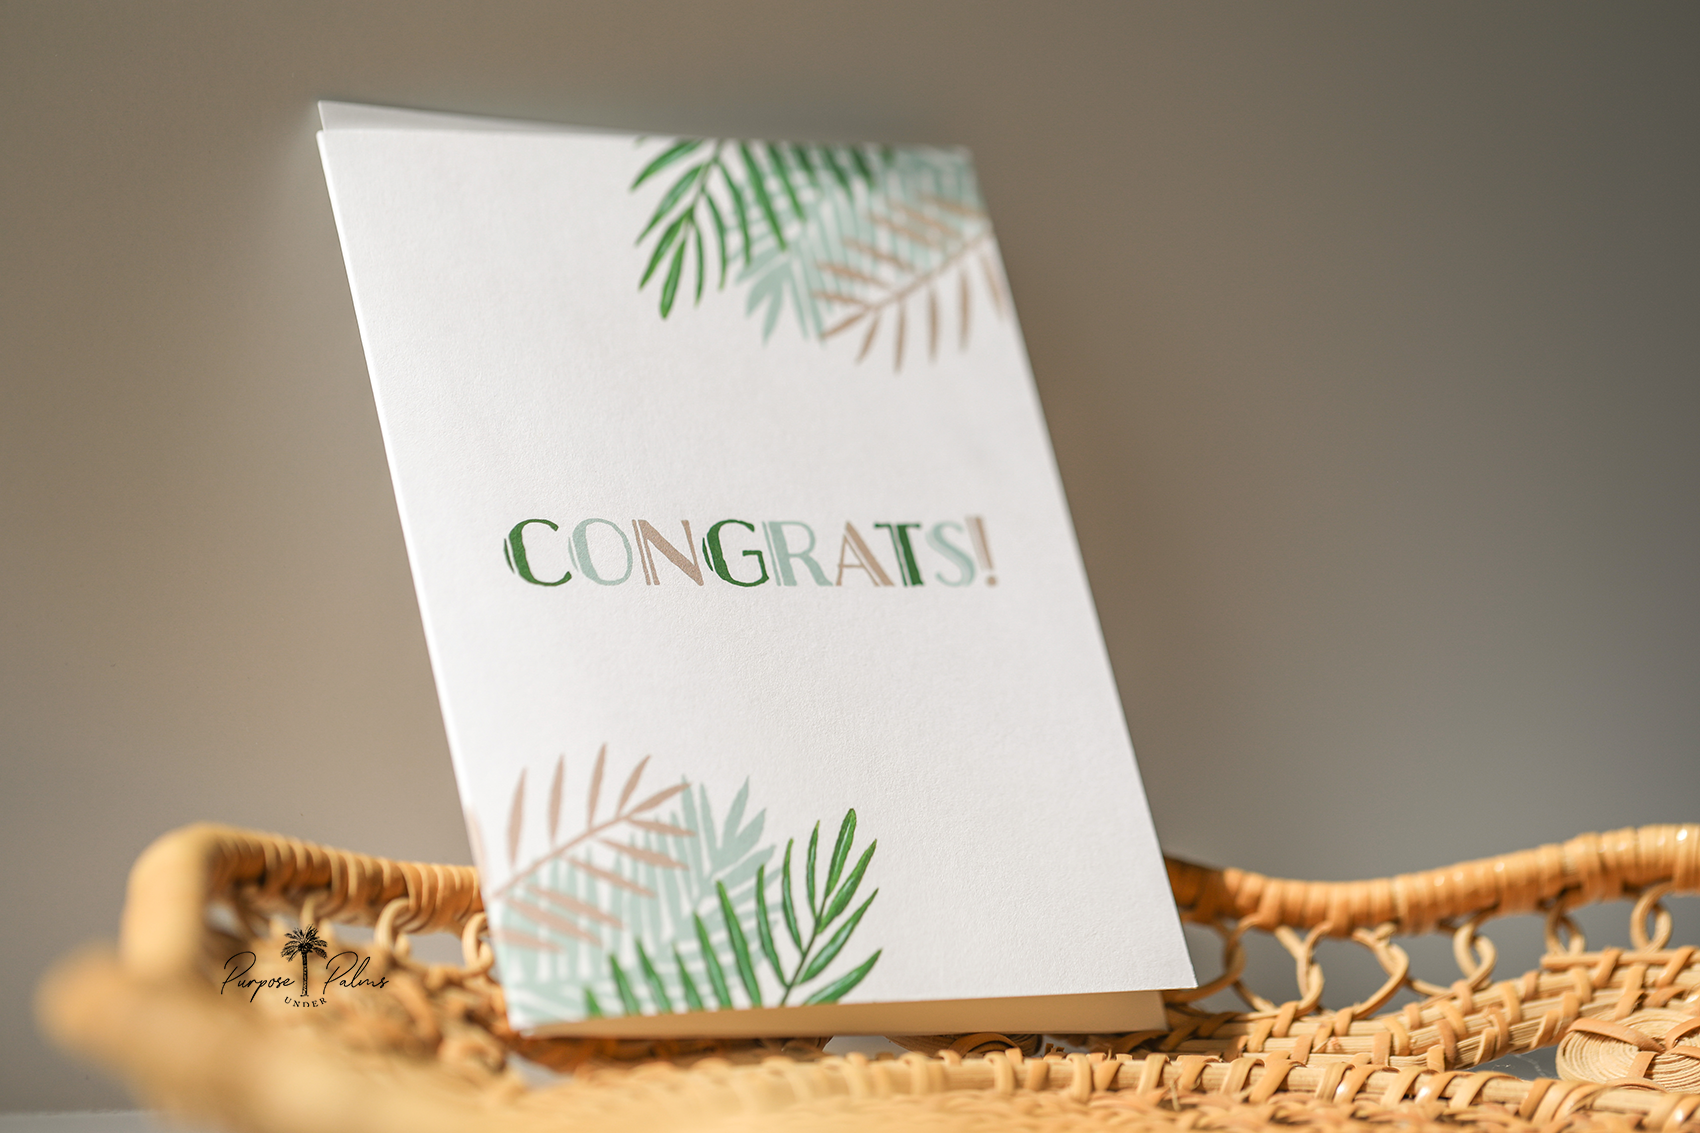 white greeting card with sage teal tan and green tropical foliage and congrats in the middle. congrats greeting card. white envelope.